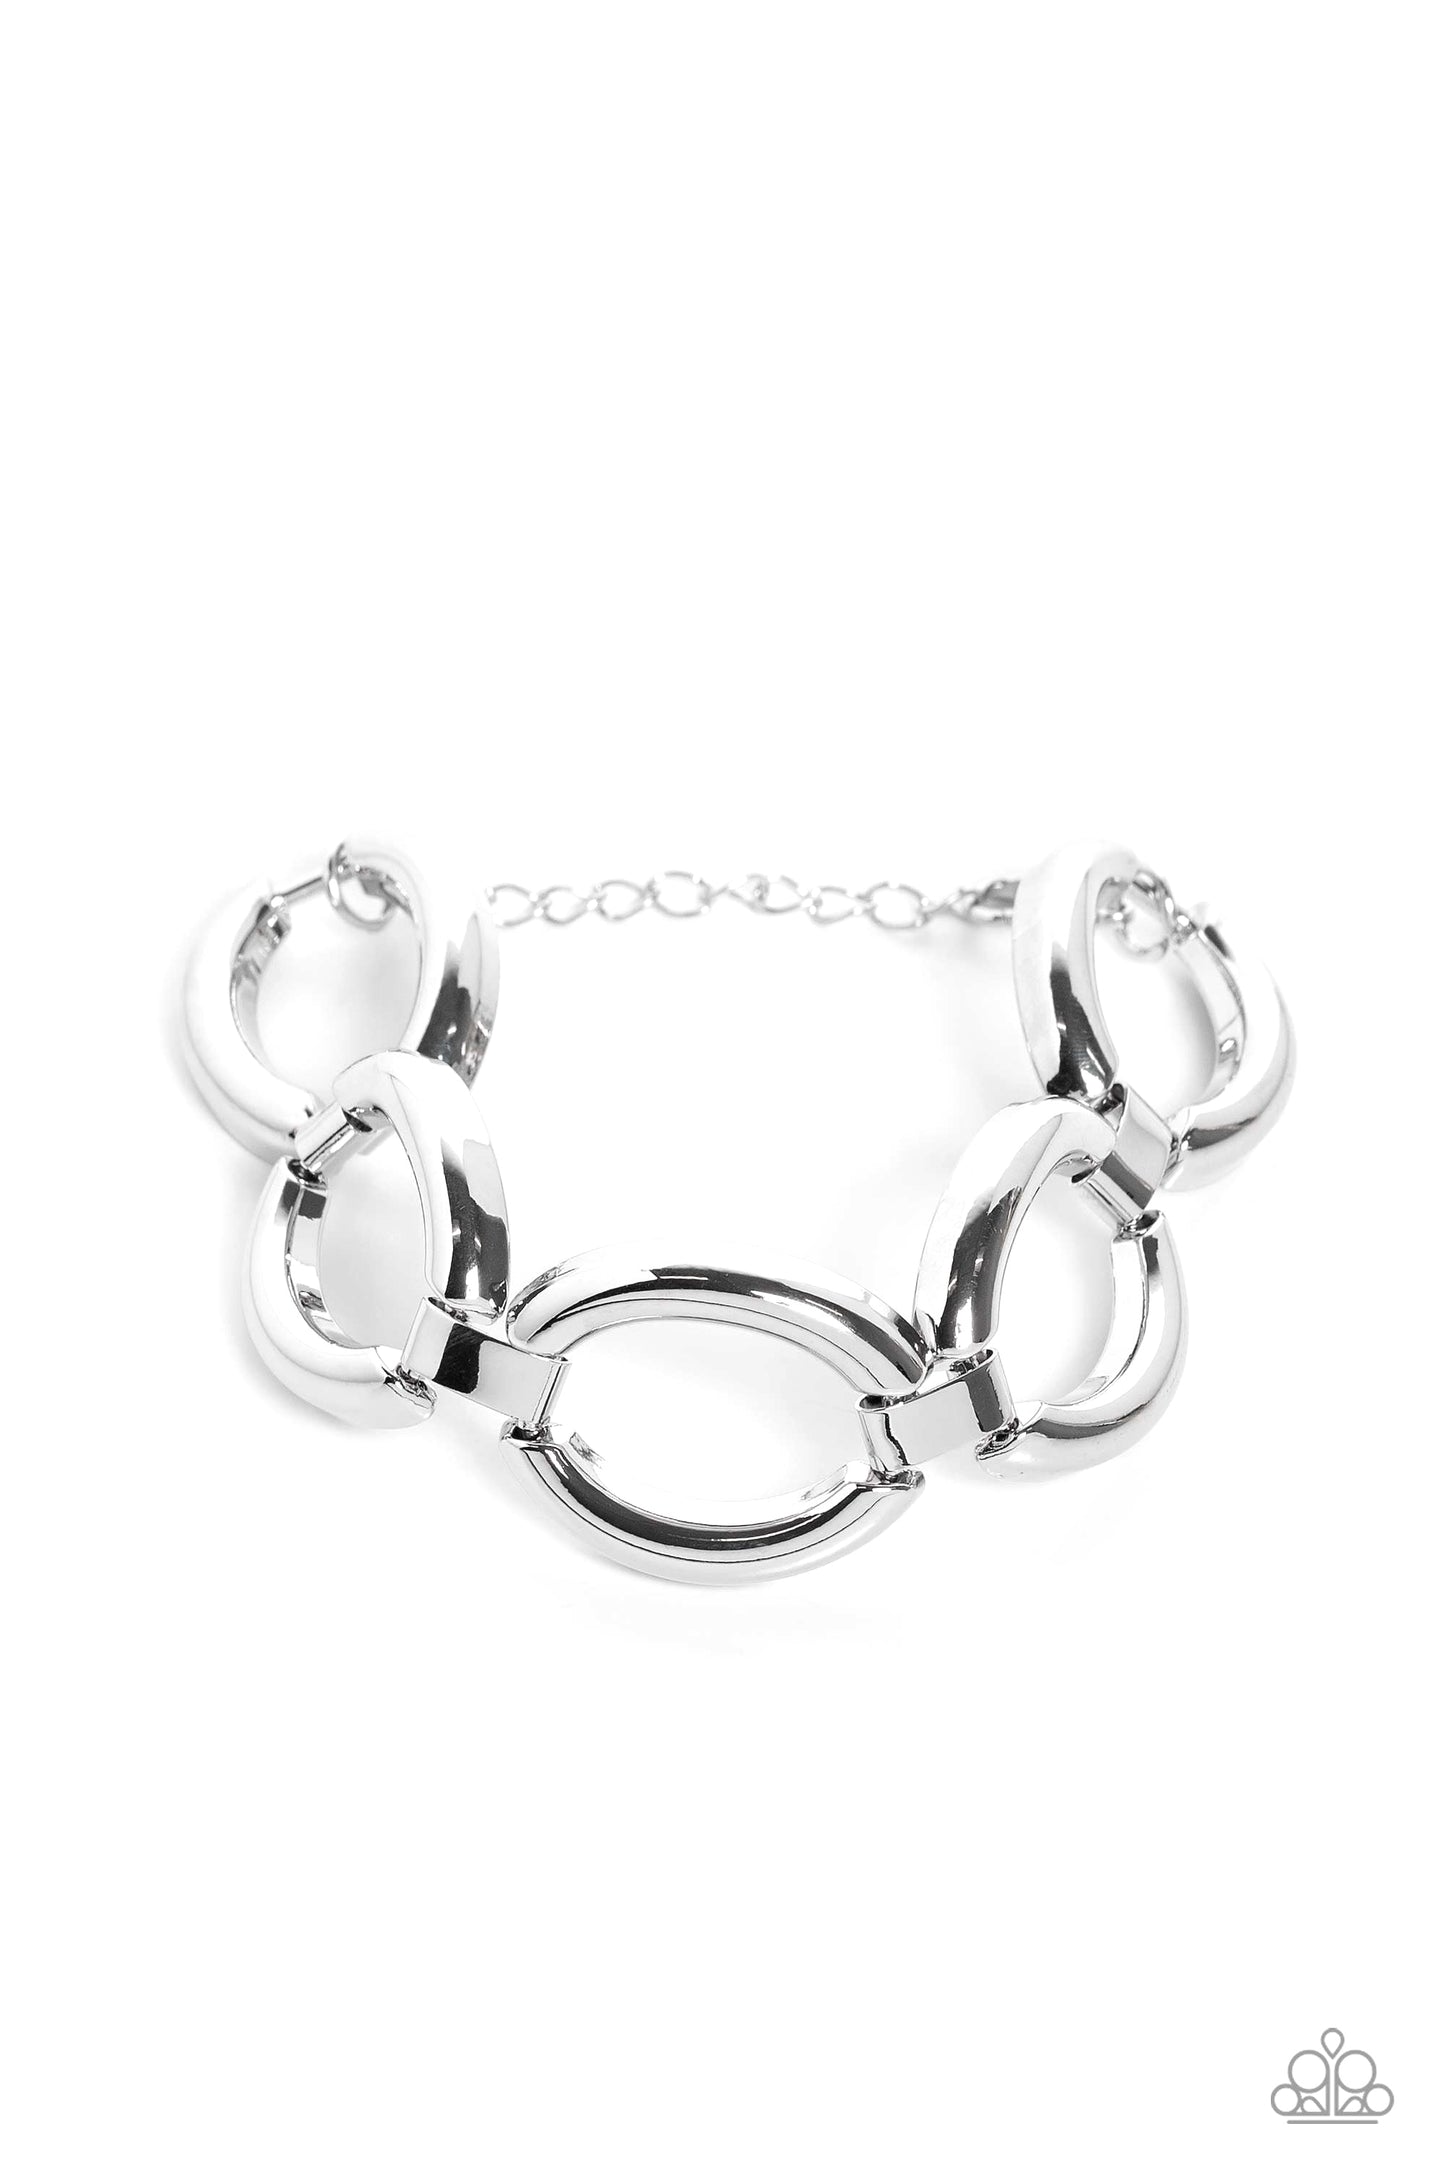 Constructed Chic - Silver Bracelet - Paparazzi Accessories - Abstract silver ovals, linked together by moveable silver clasps, link around the wrist for a high-sheen, industrial finish. Features an adjustable clasp closure.